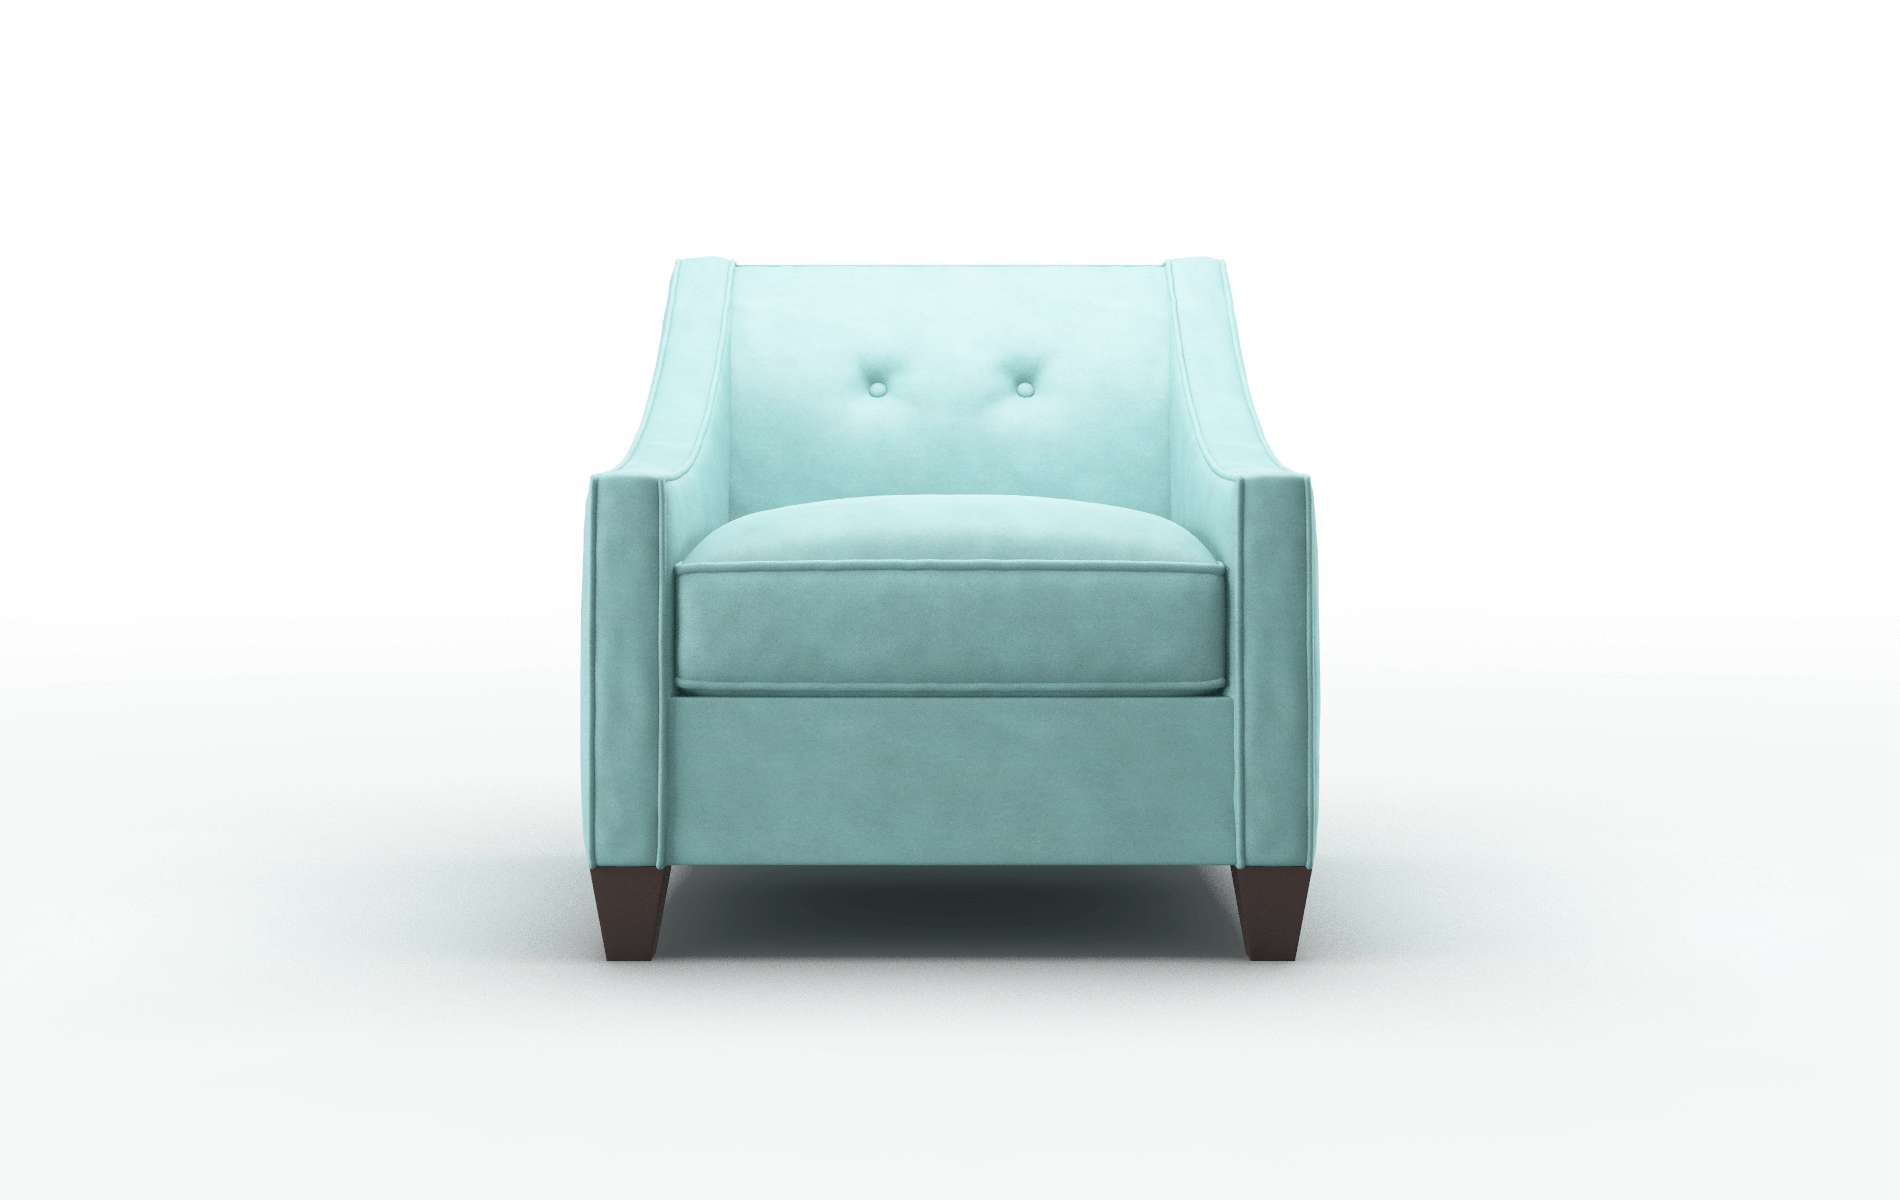 Berlin Curious Turquoise Chair espresso legs 1